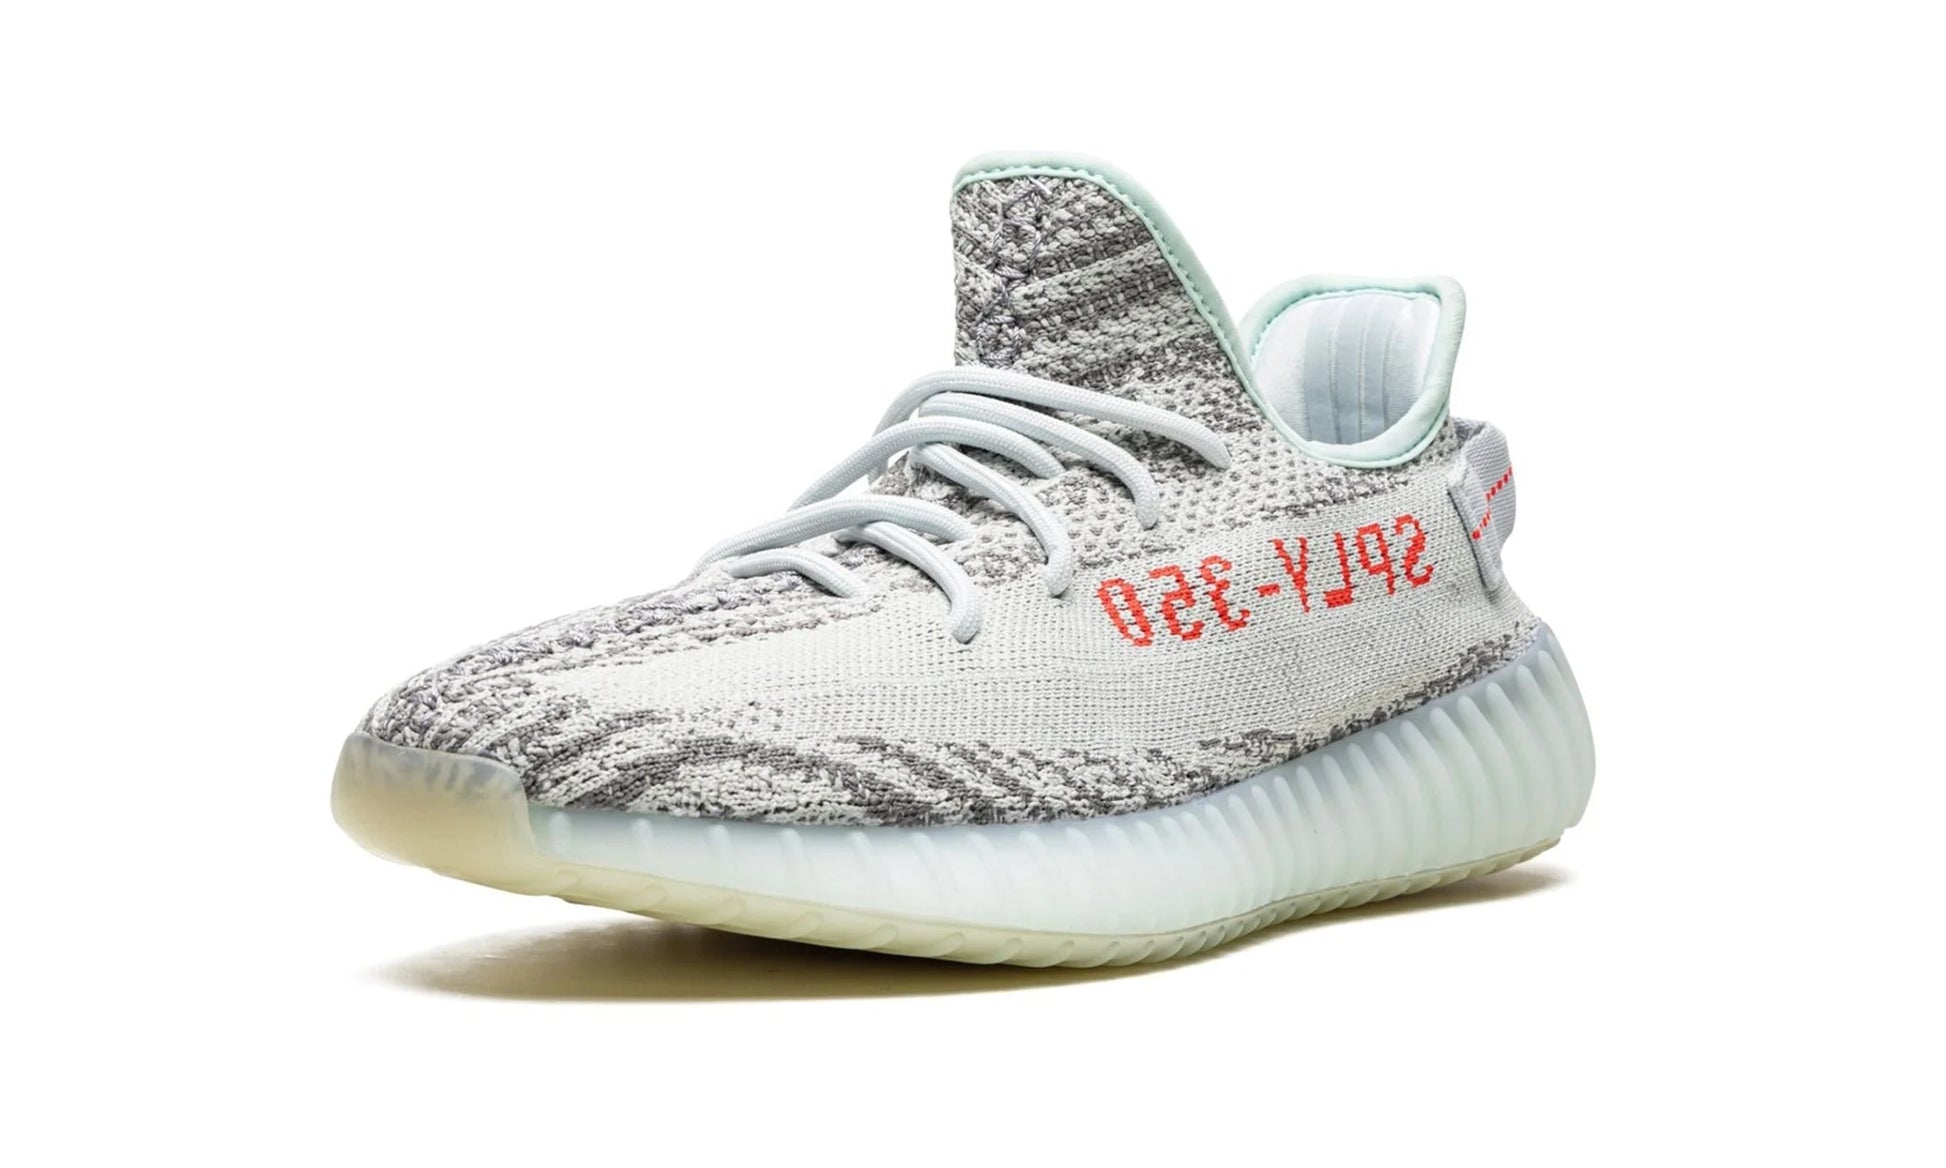 Adidas Yeezy 350 V2 Blue Tint Single Shoe Front View